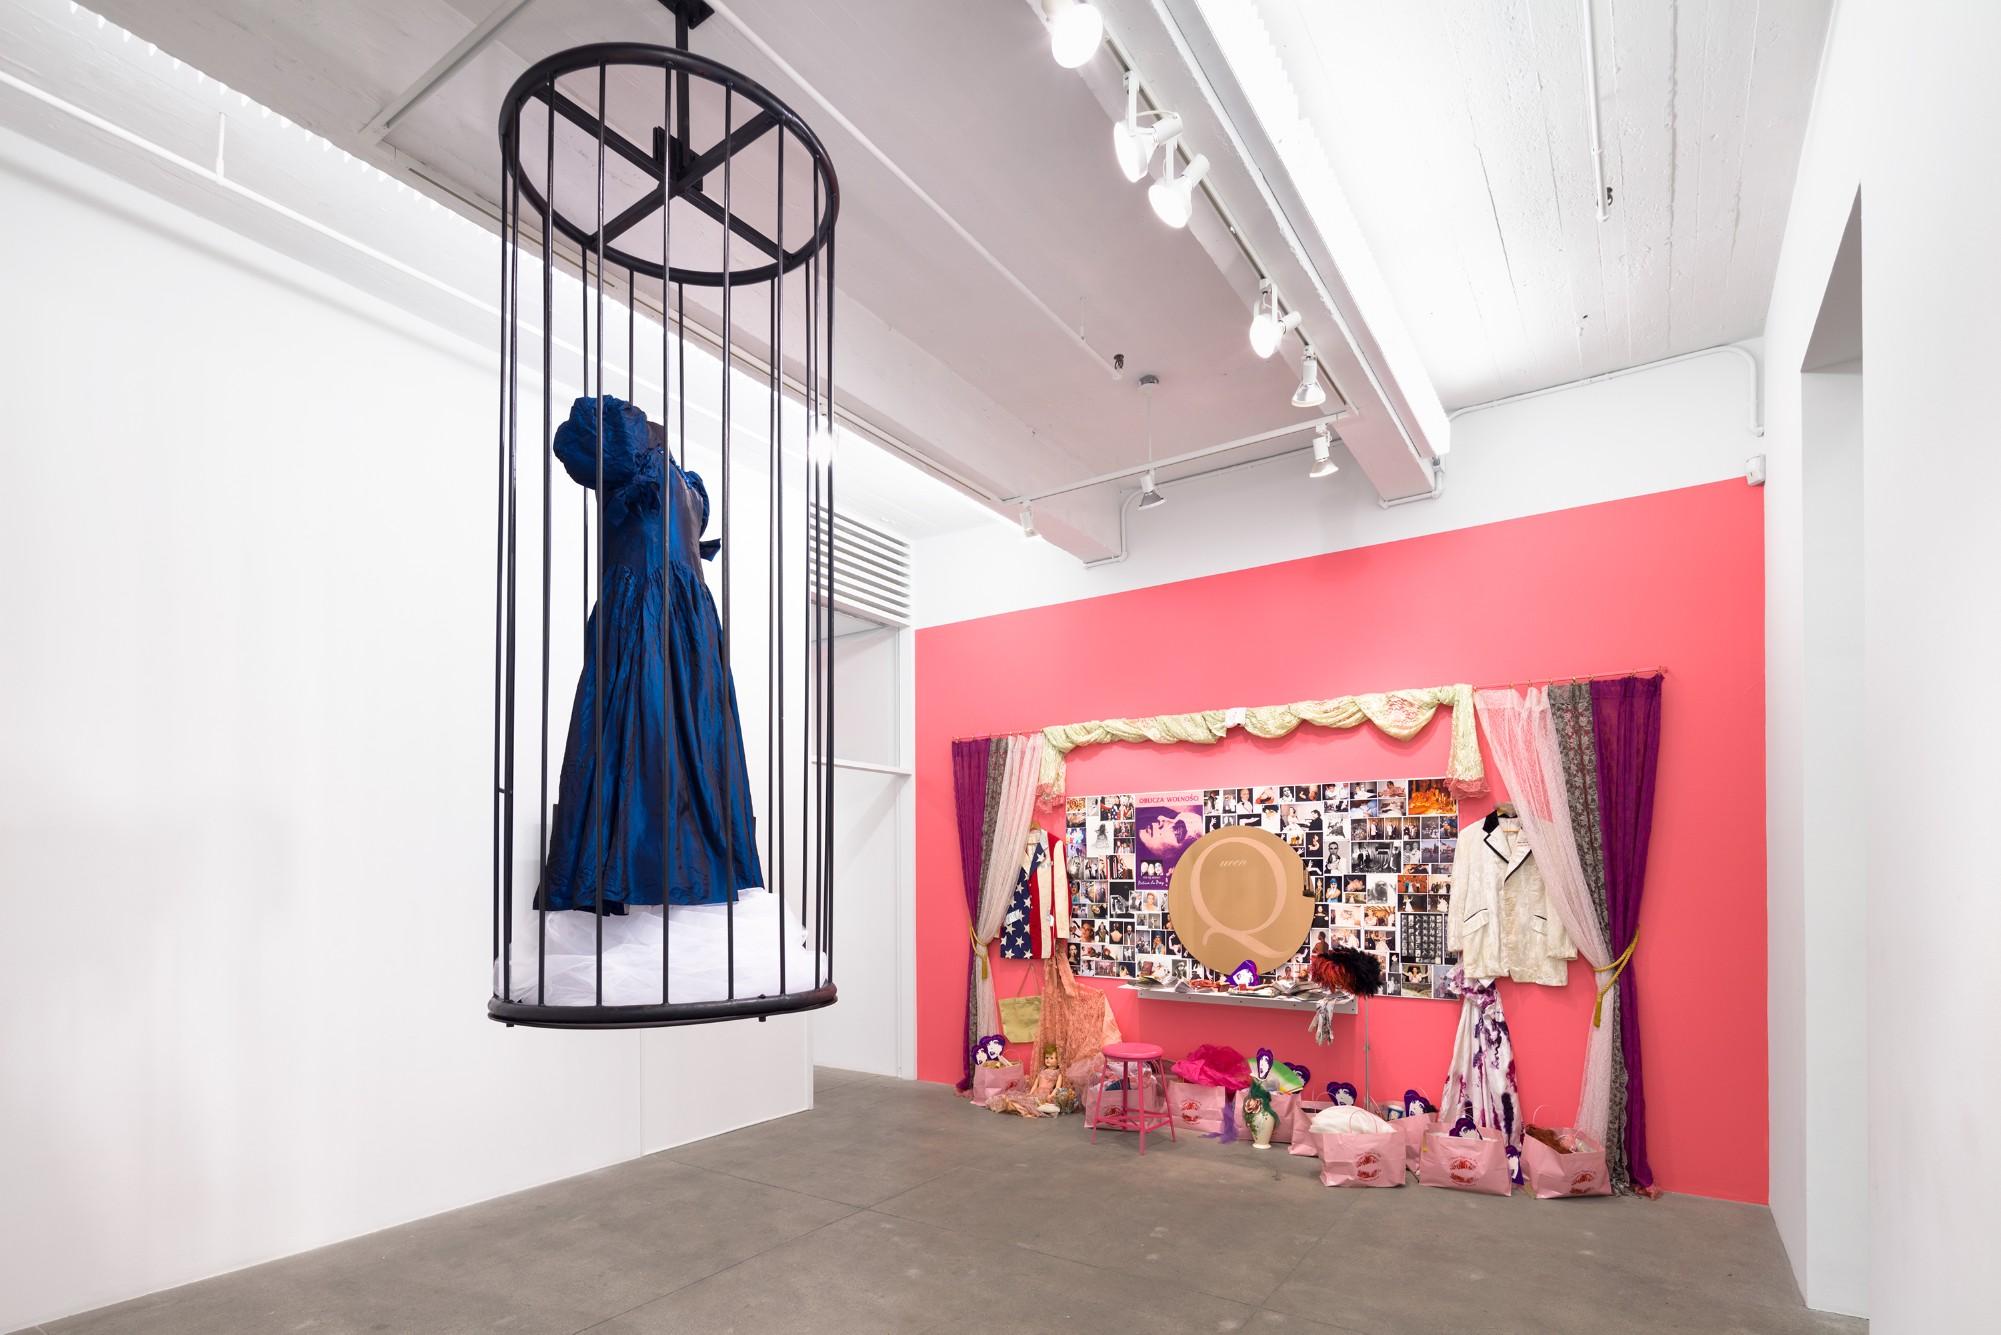 Installation view, Hunter Reynolds’ From Drag to Dervish at P·P·O·W, New York, now available to view online.